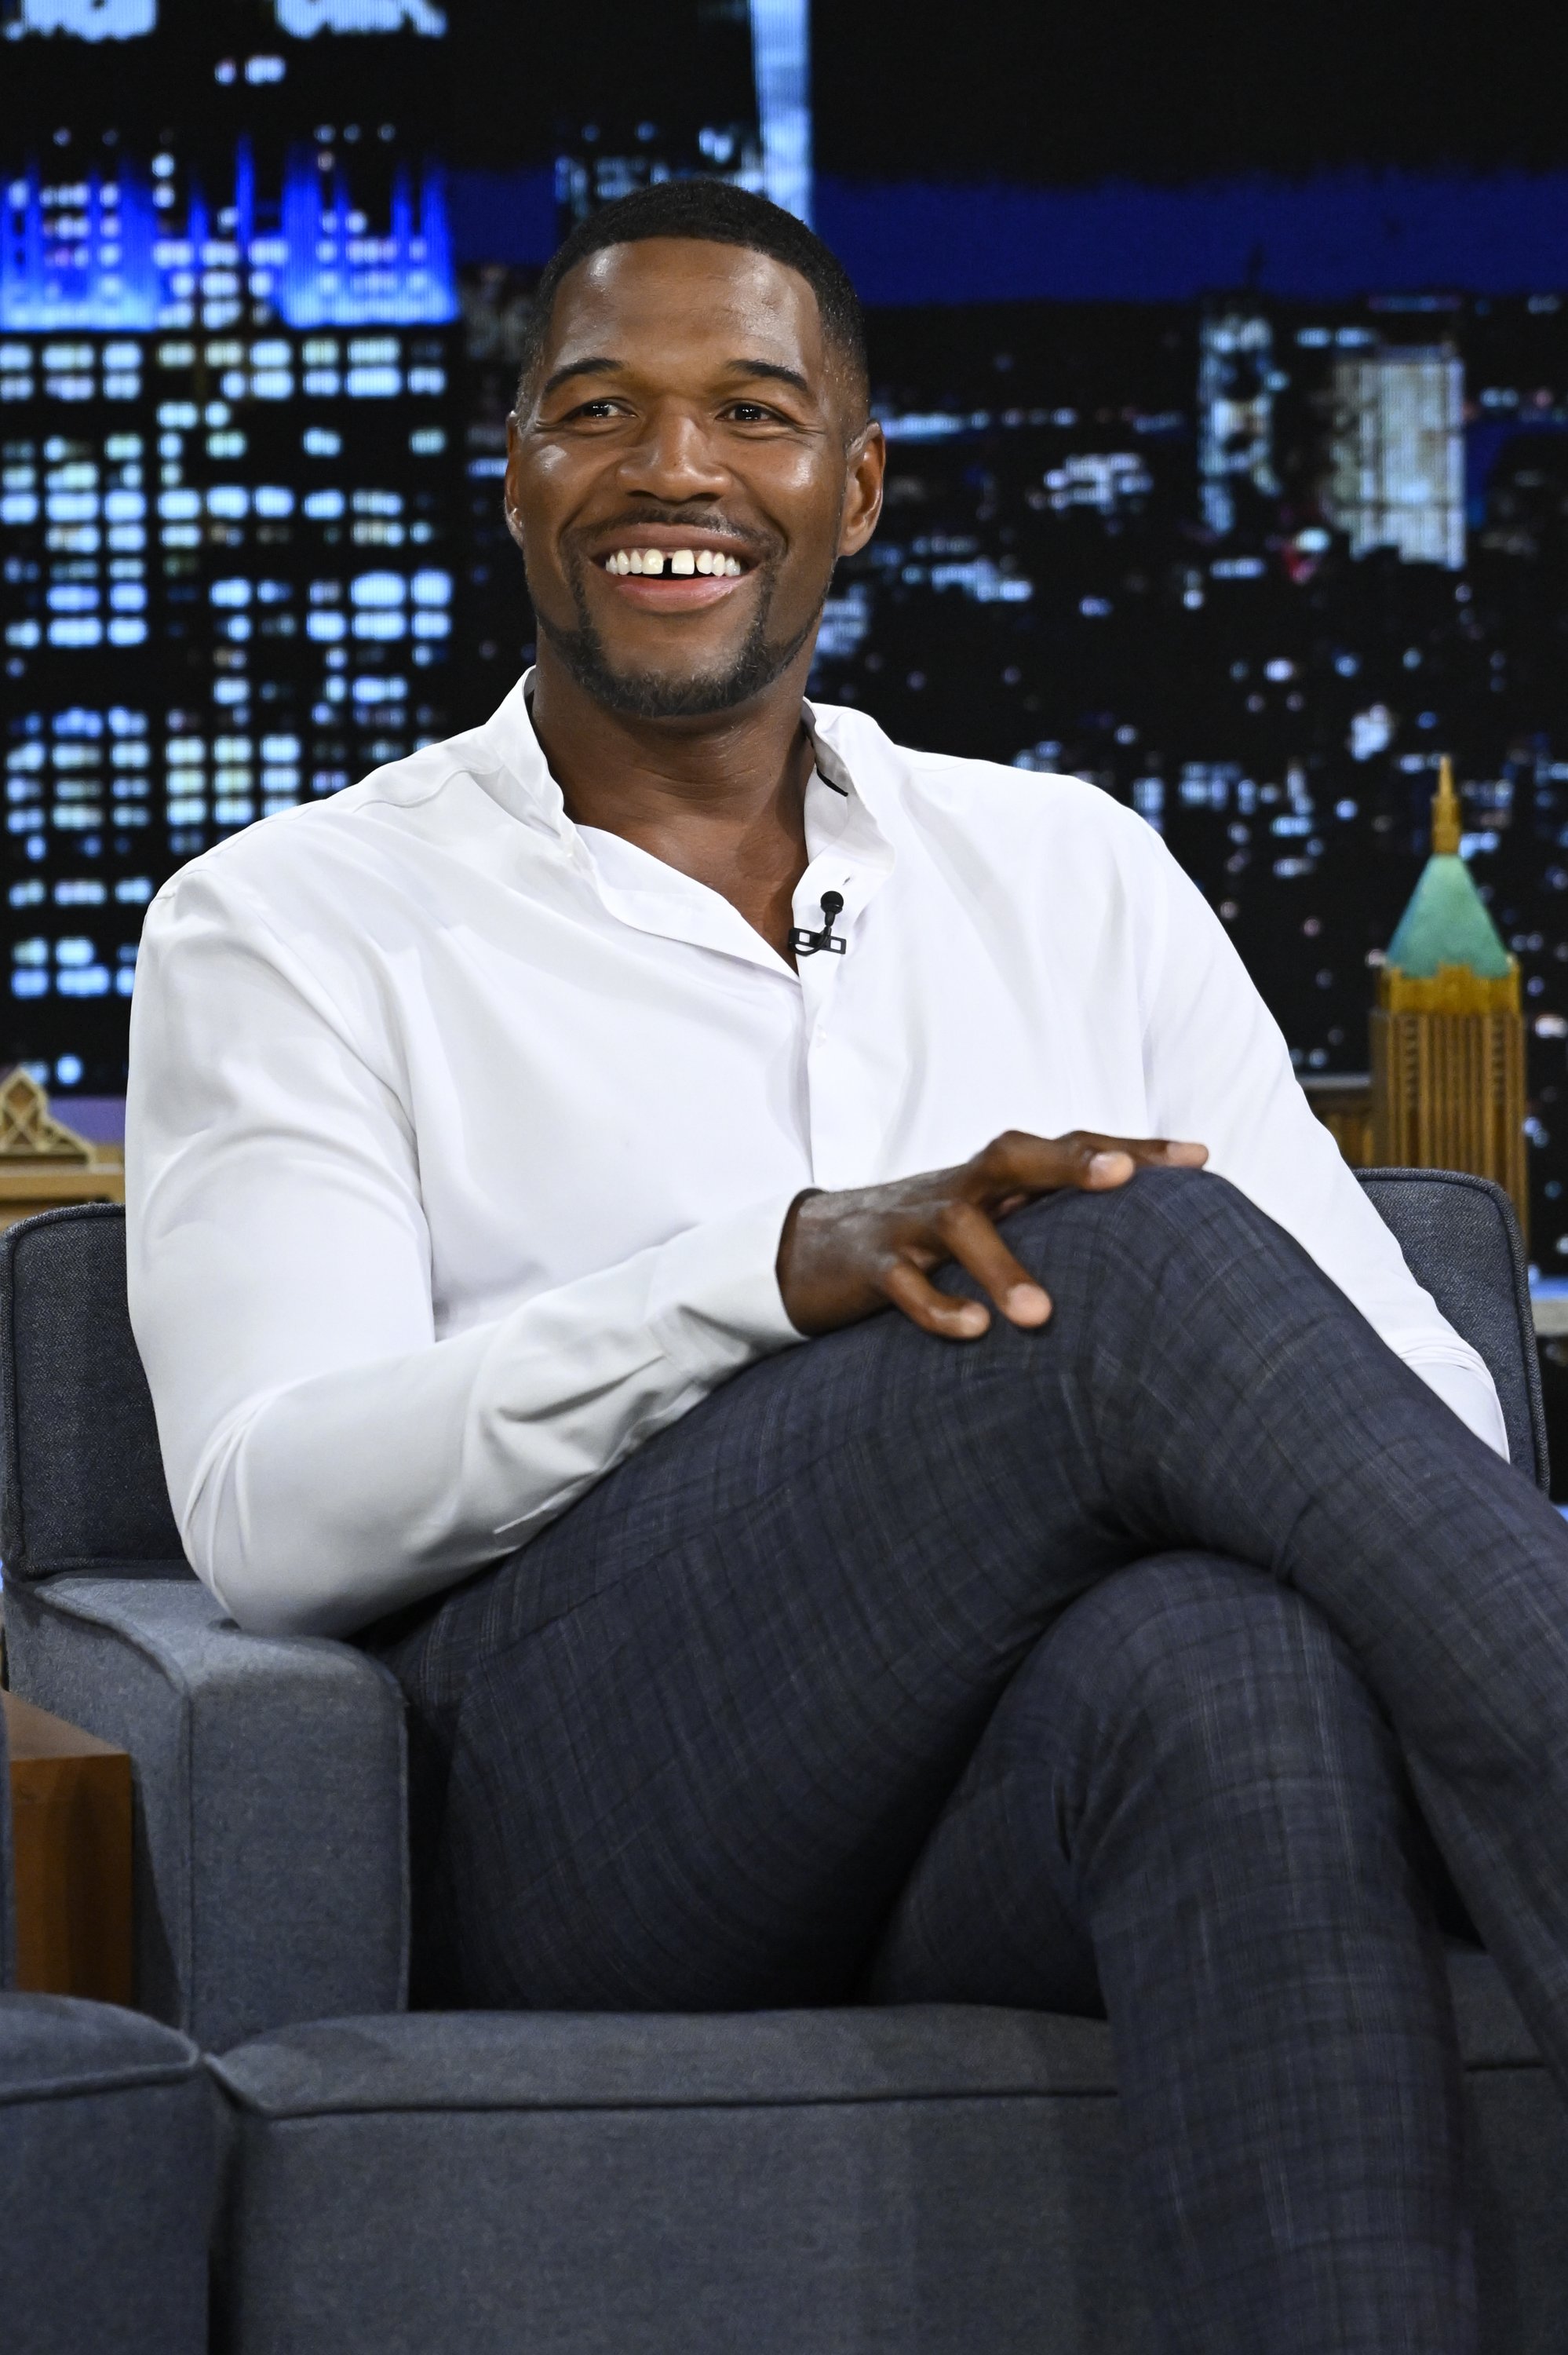 TV personality Michael Strahan during an interview on Tuesday, August 2, 2022. | Source: Getty Images